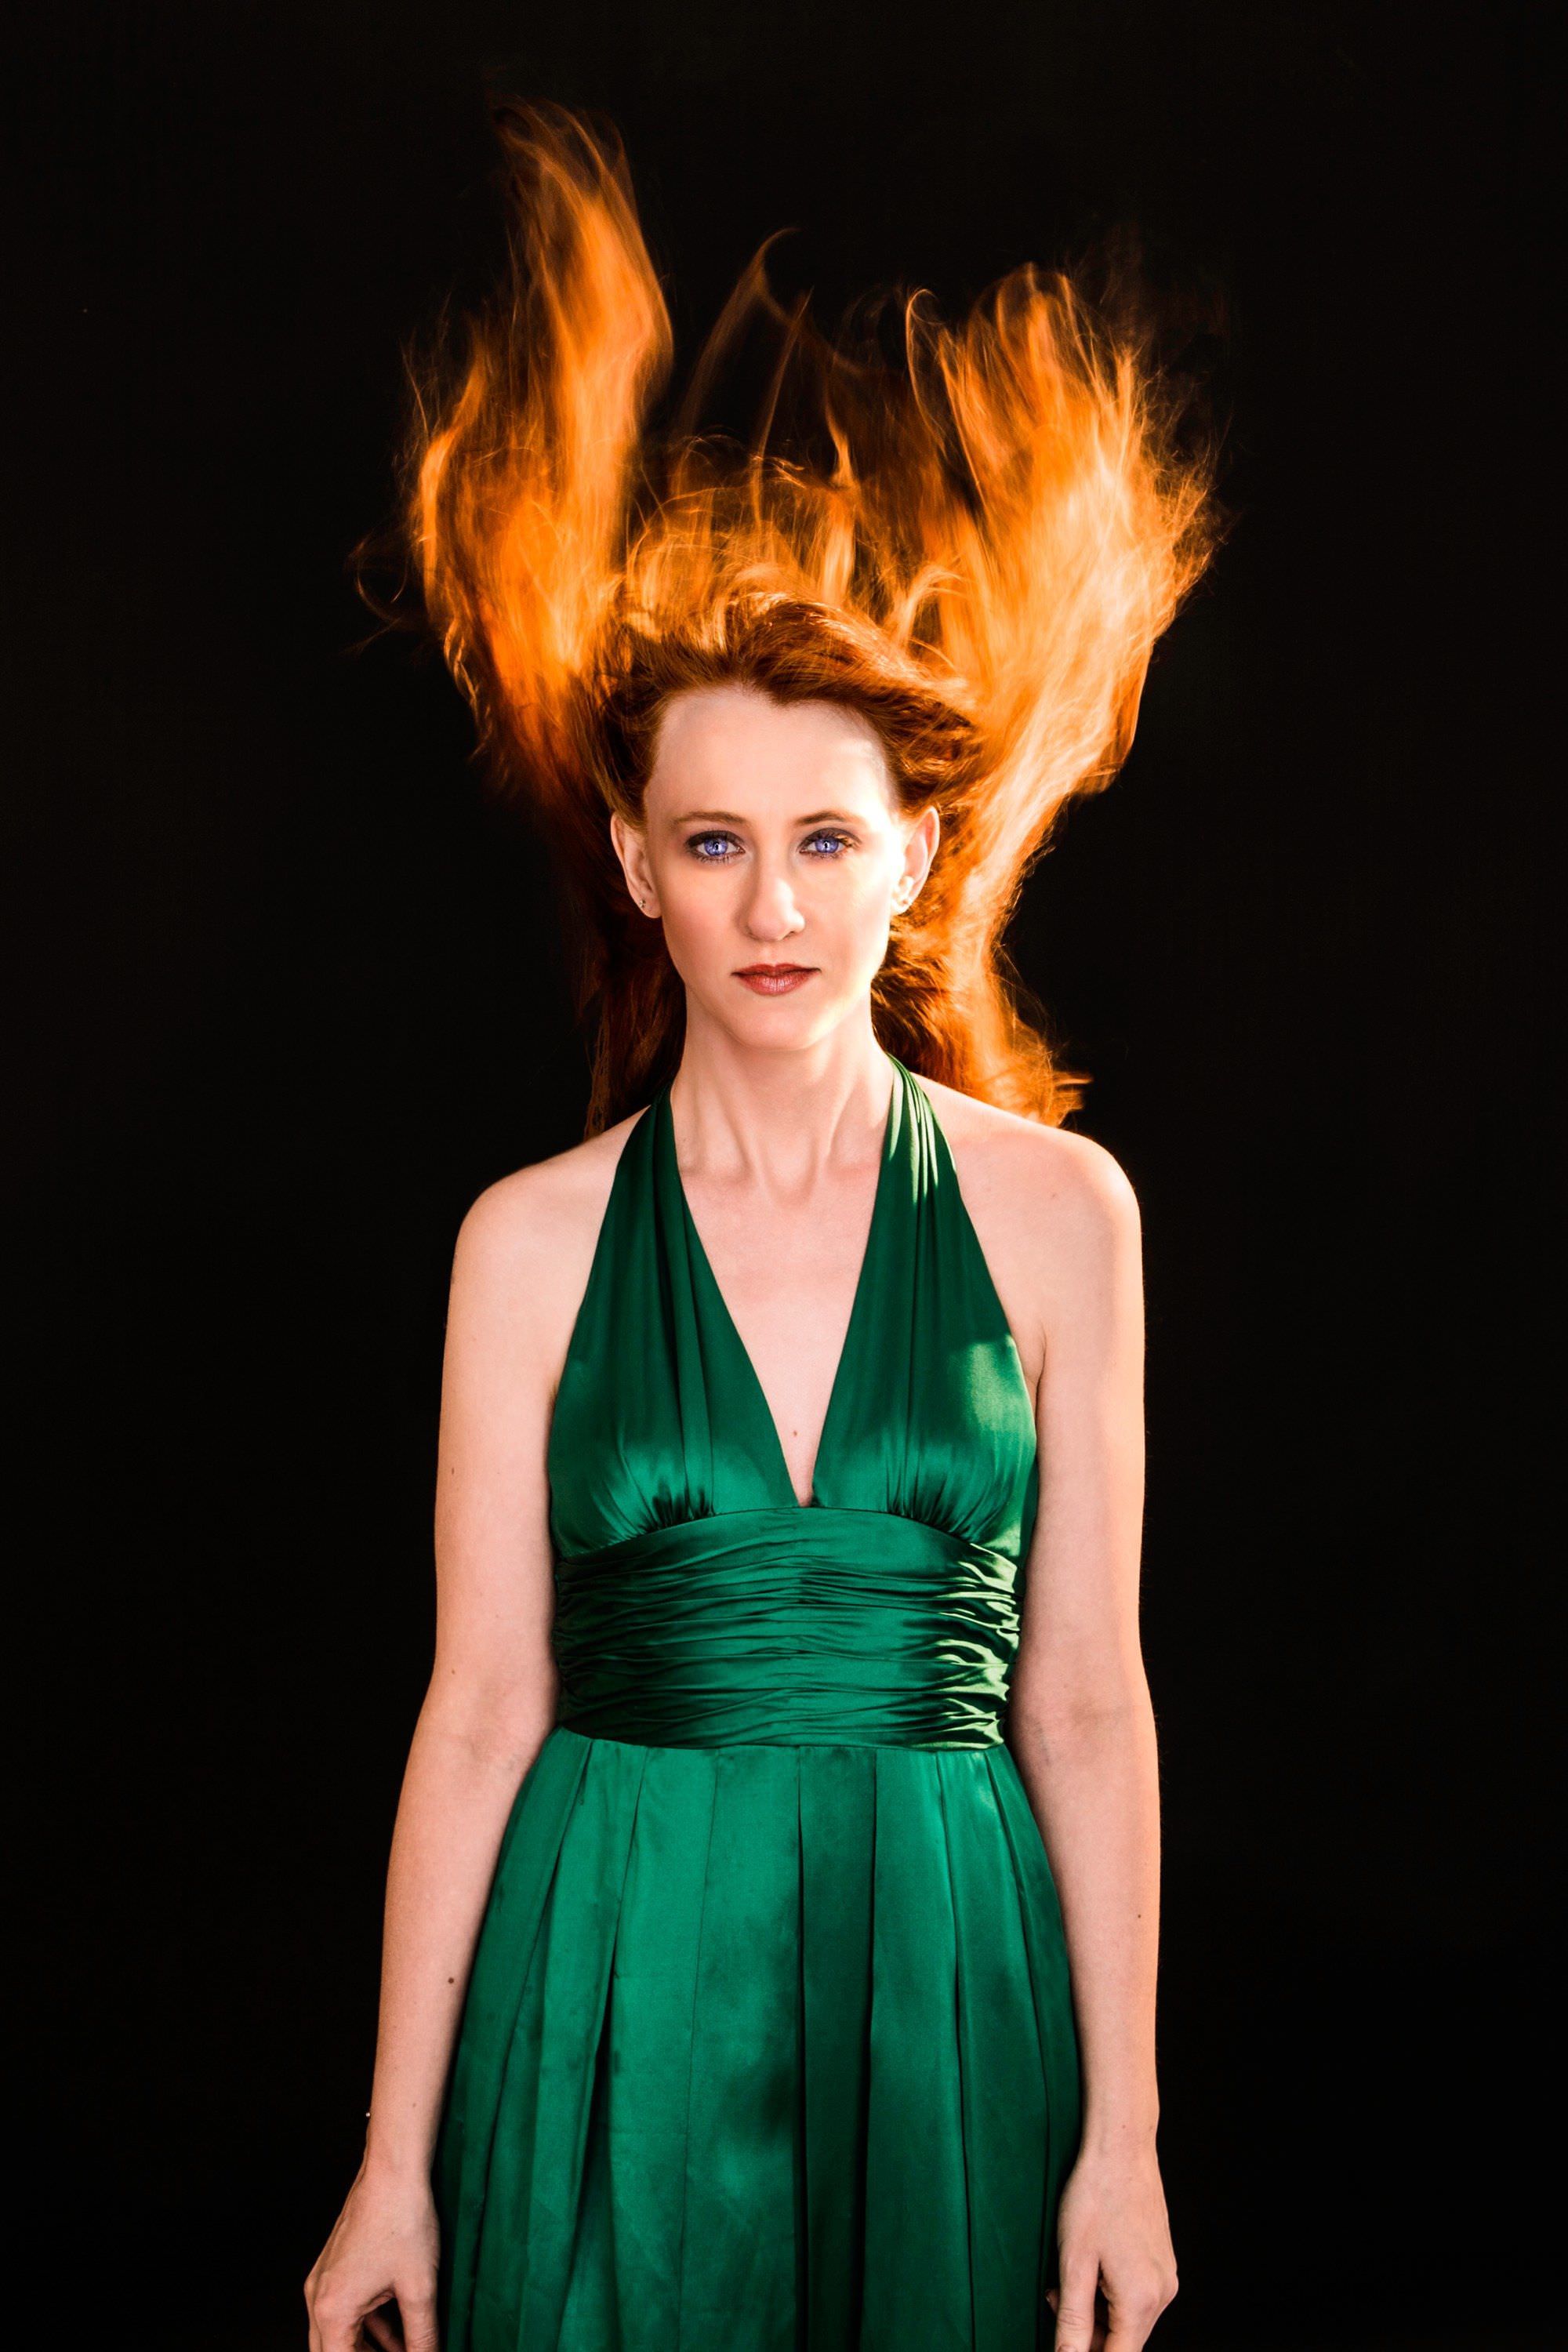 Woman with shocking red hair in a green dress in the same pose as Drew Barrymore in Firestarter. Photo by Miceli Productions